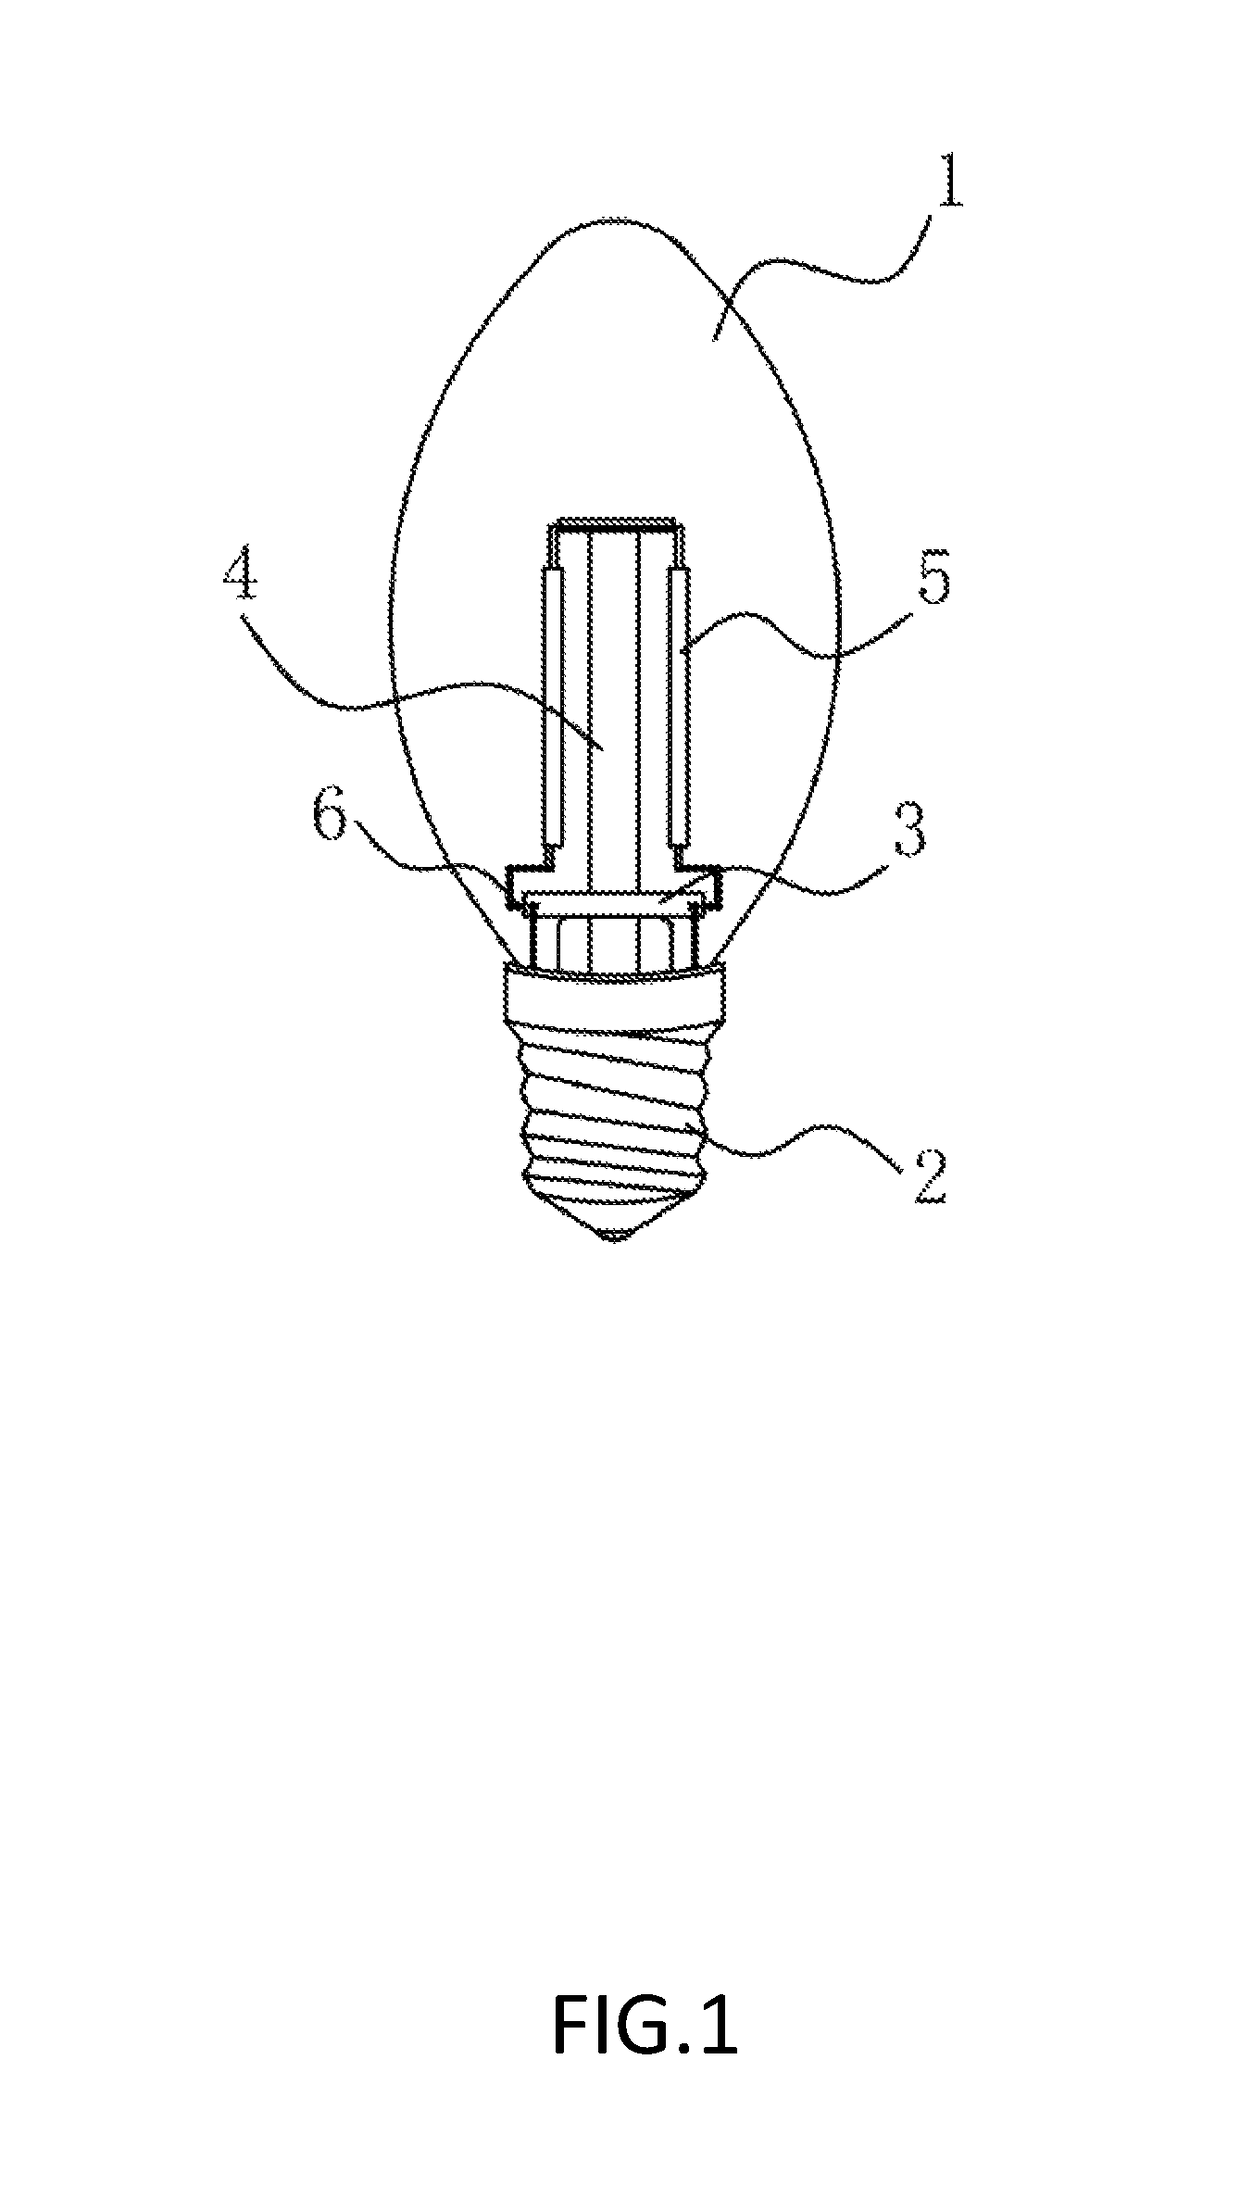 LED bulb applicable for industrial automated production